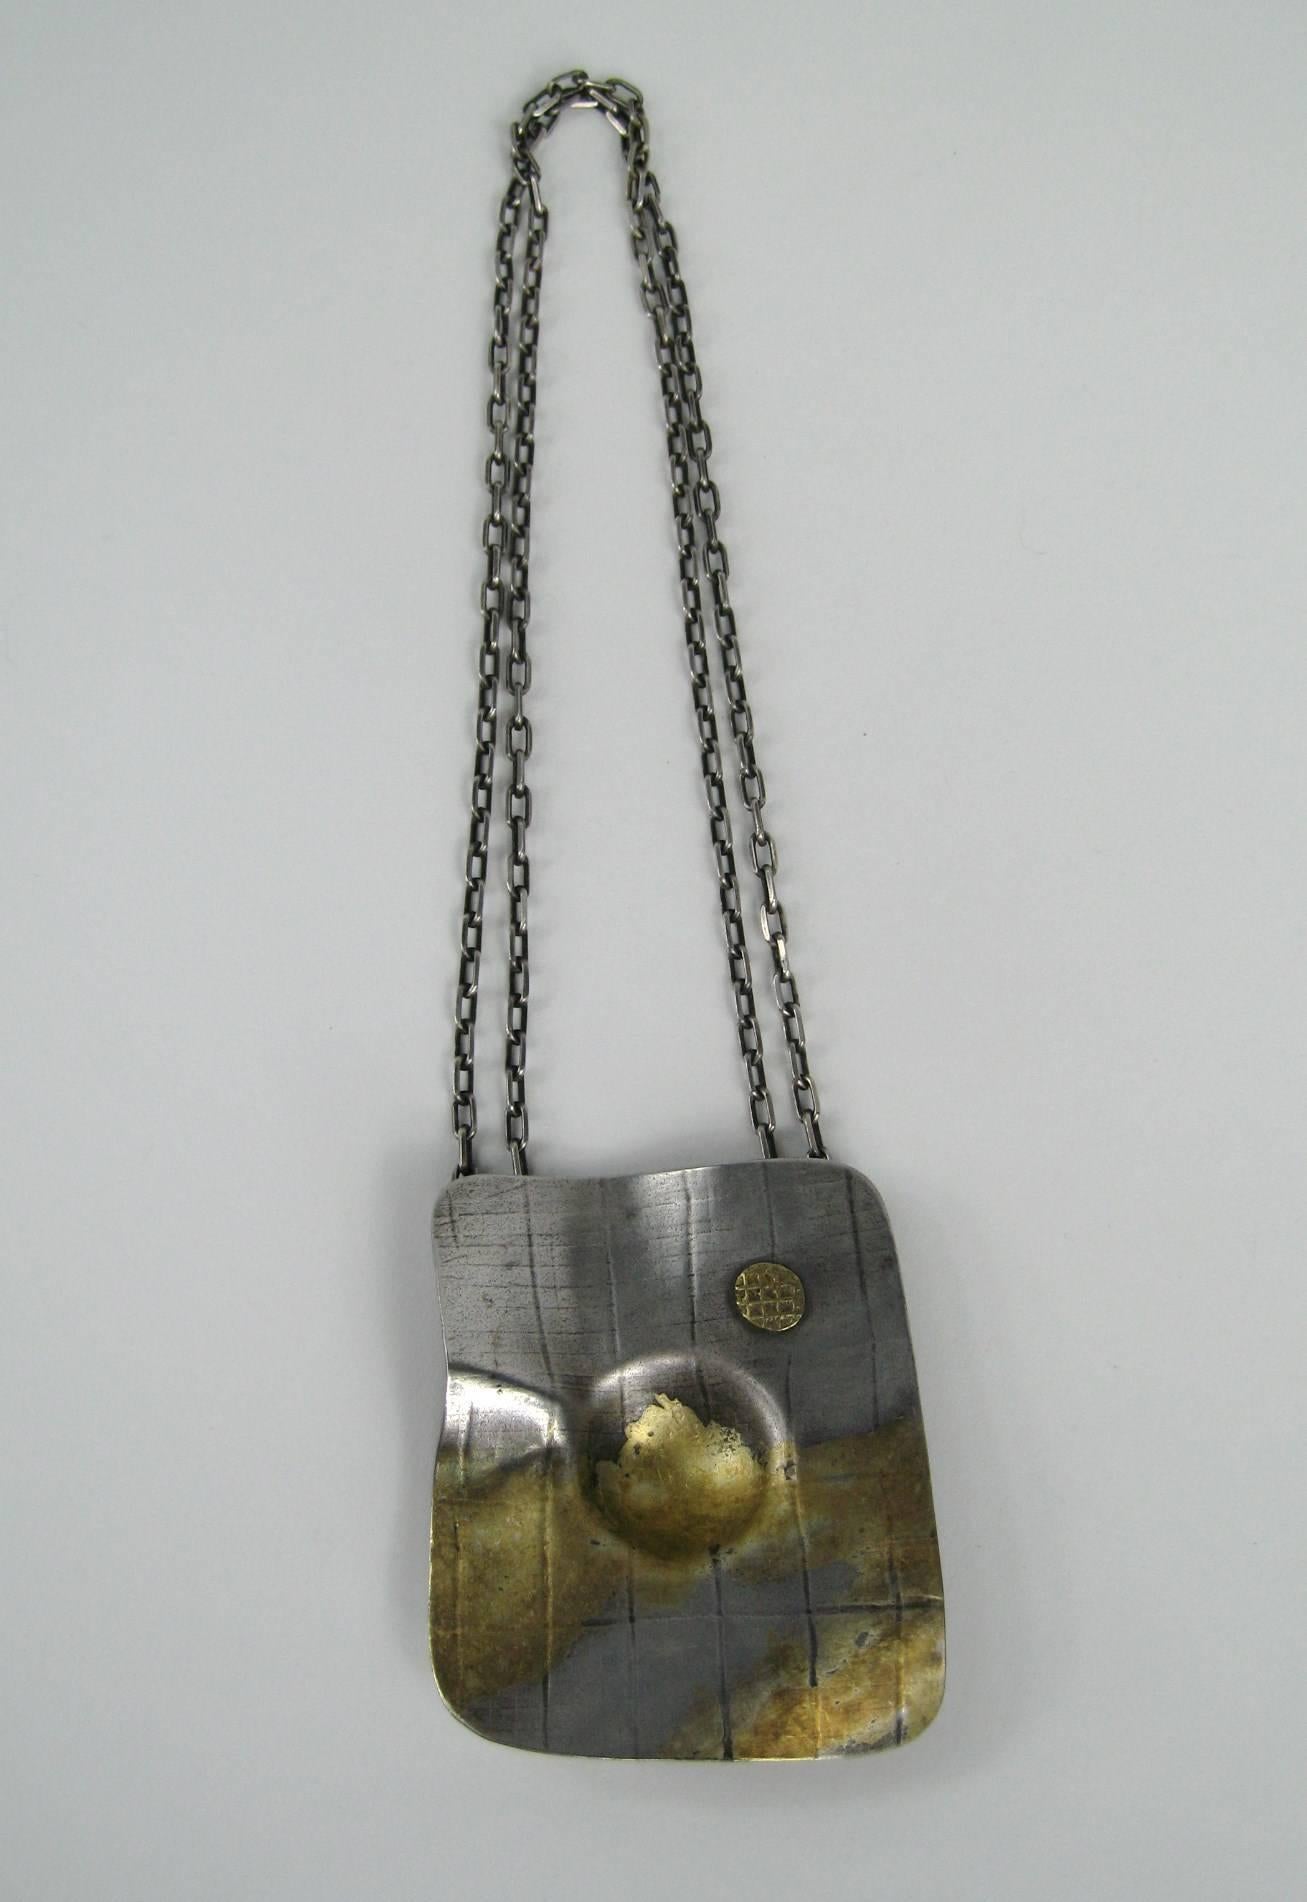 Stunning workmanship on this handcrafted Sterling Silver Necklace. Gold wash over the silver. Measuring 26